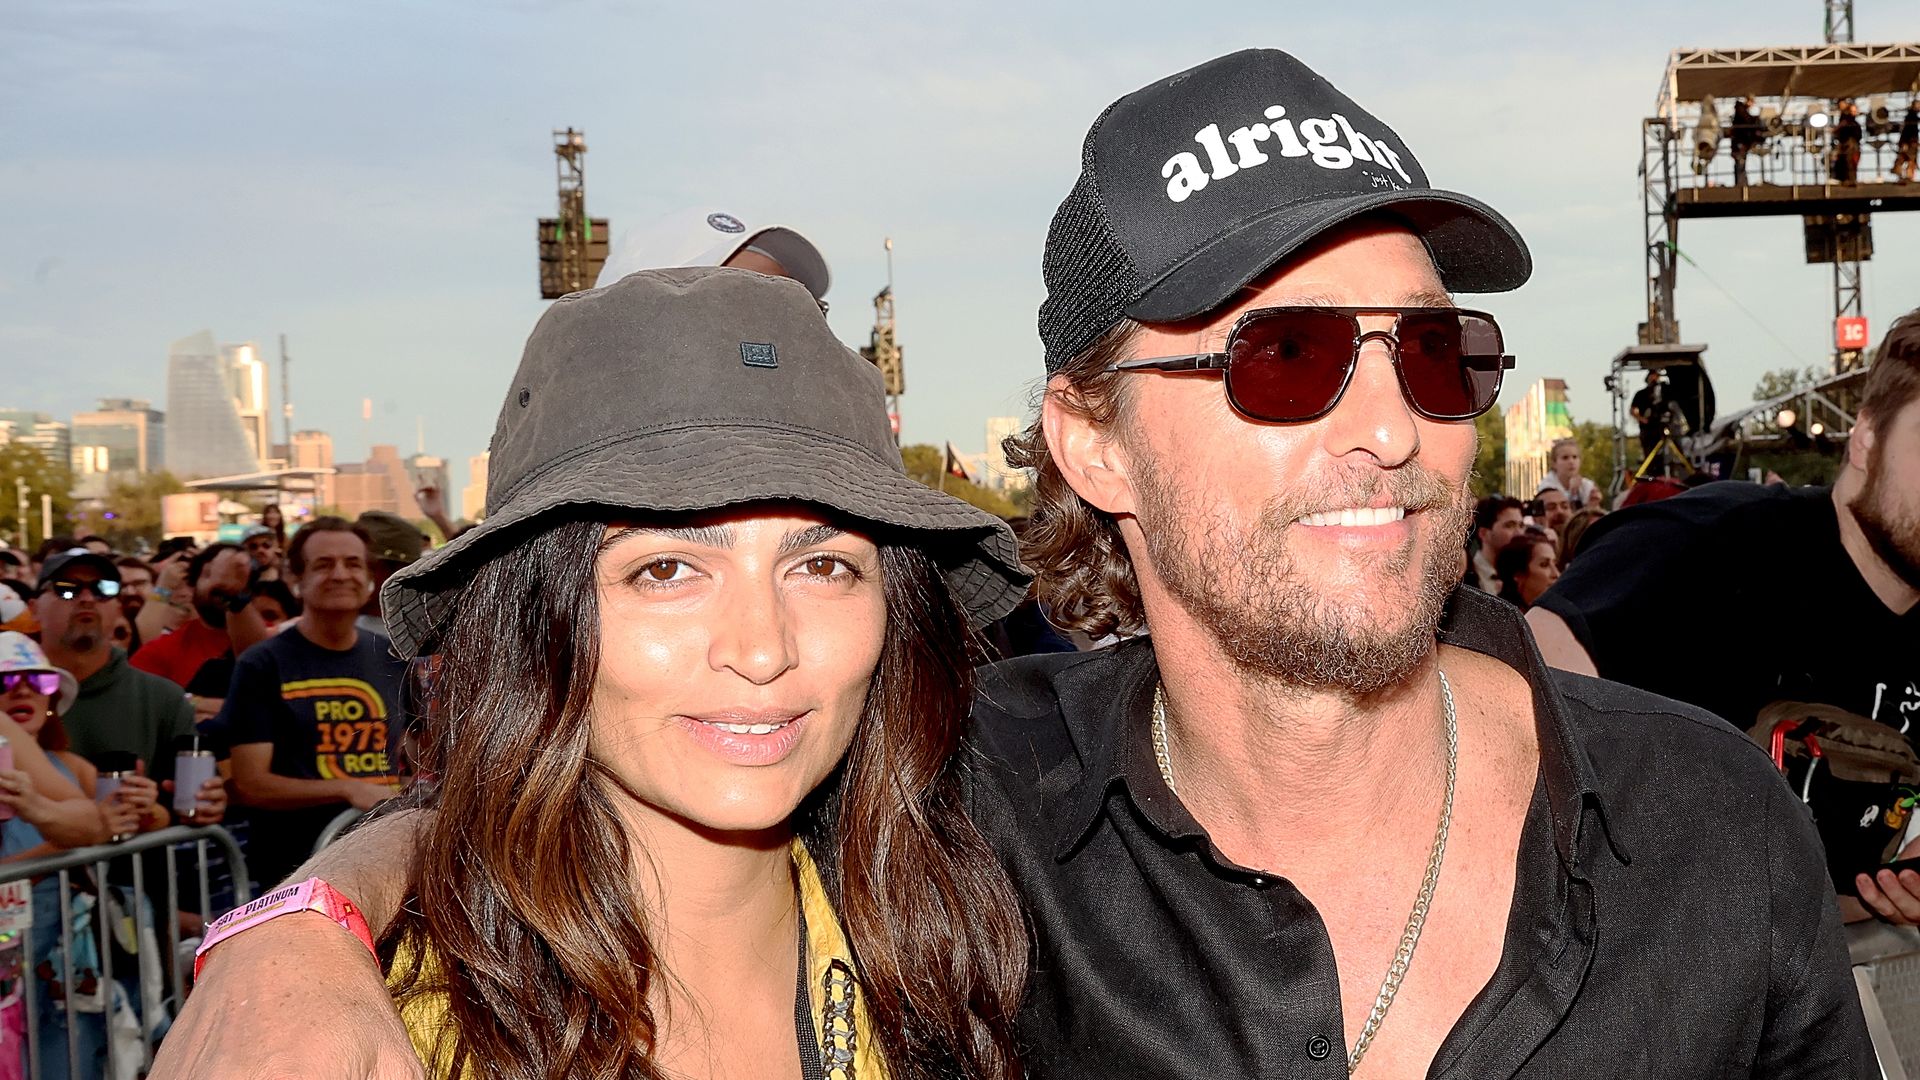 Camila Alves McConaughey (L) and Matthew McConaughey were glowing at the festival